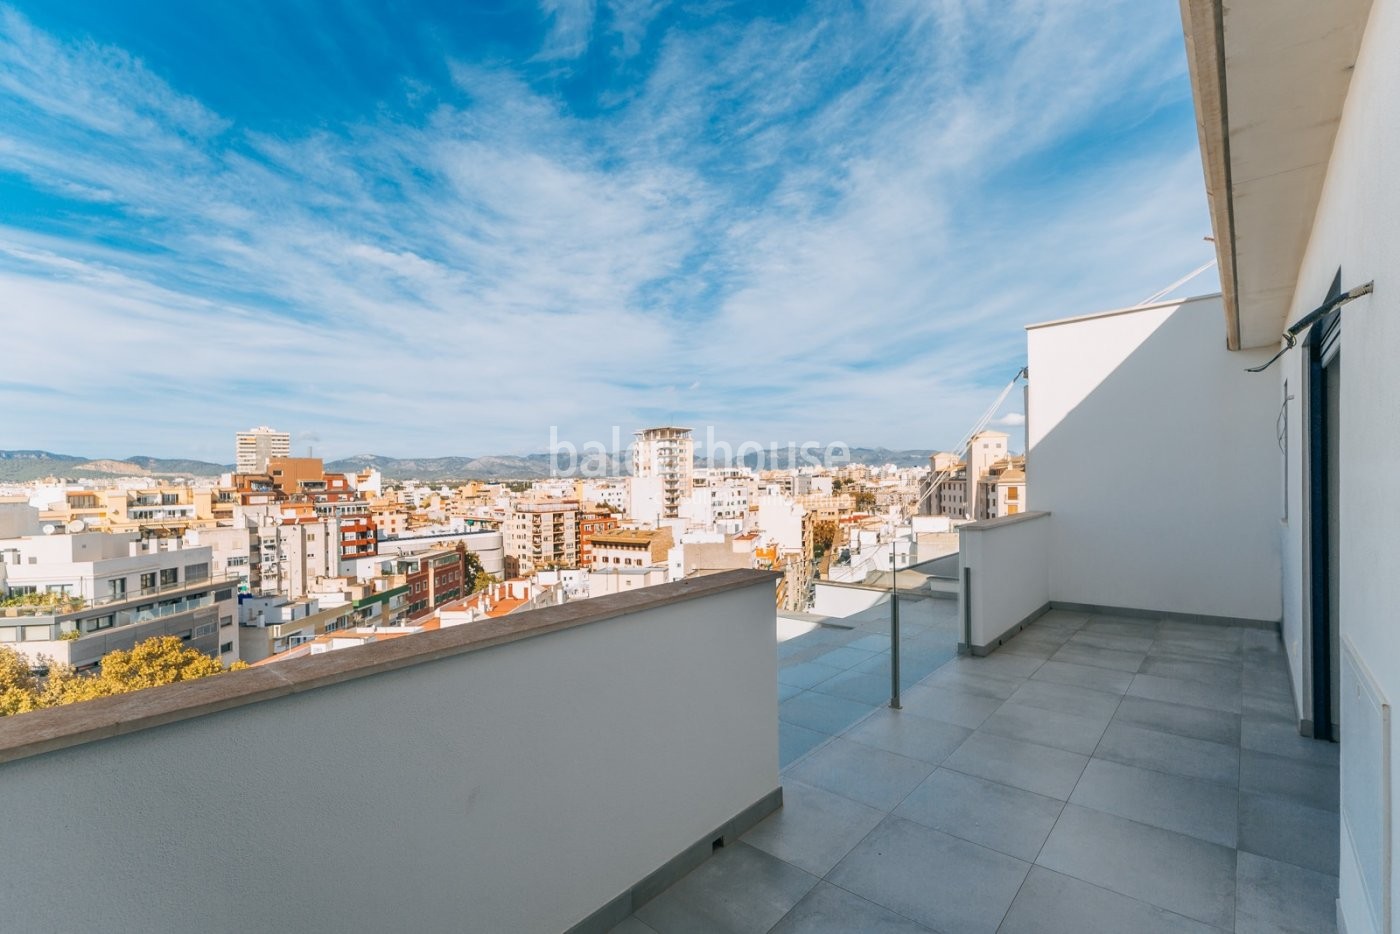 Spectacular designer penthouse in the centre of Palma with large terraces and beautiful views.